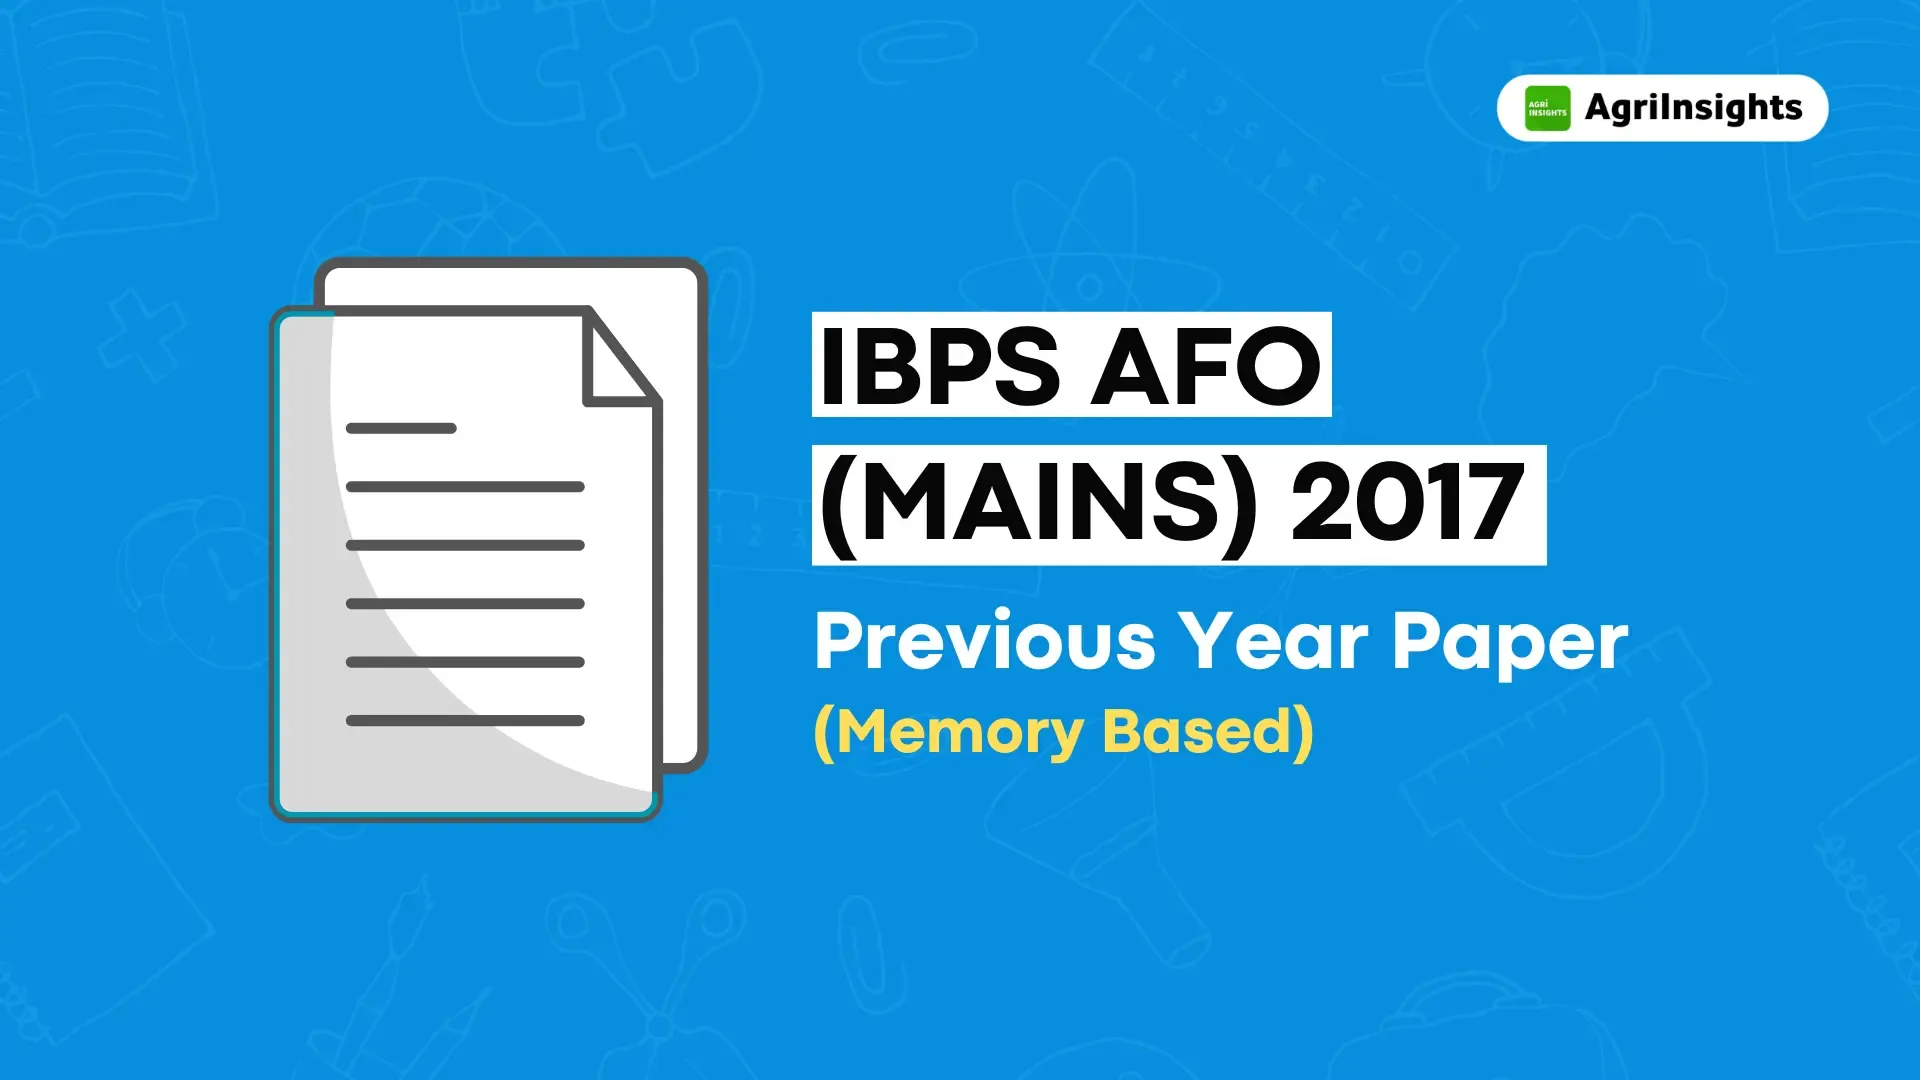 IBPS AFO Mains 2017 Solved Previous Year Paper